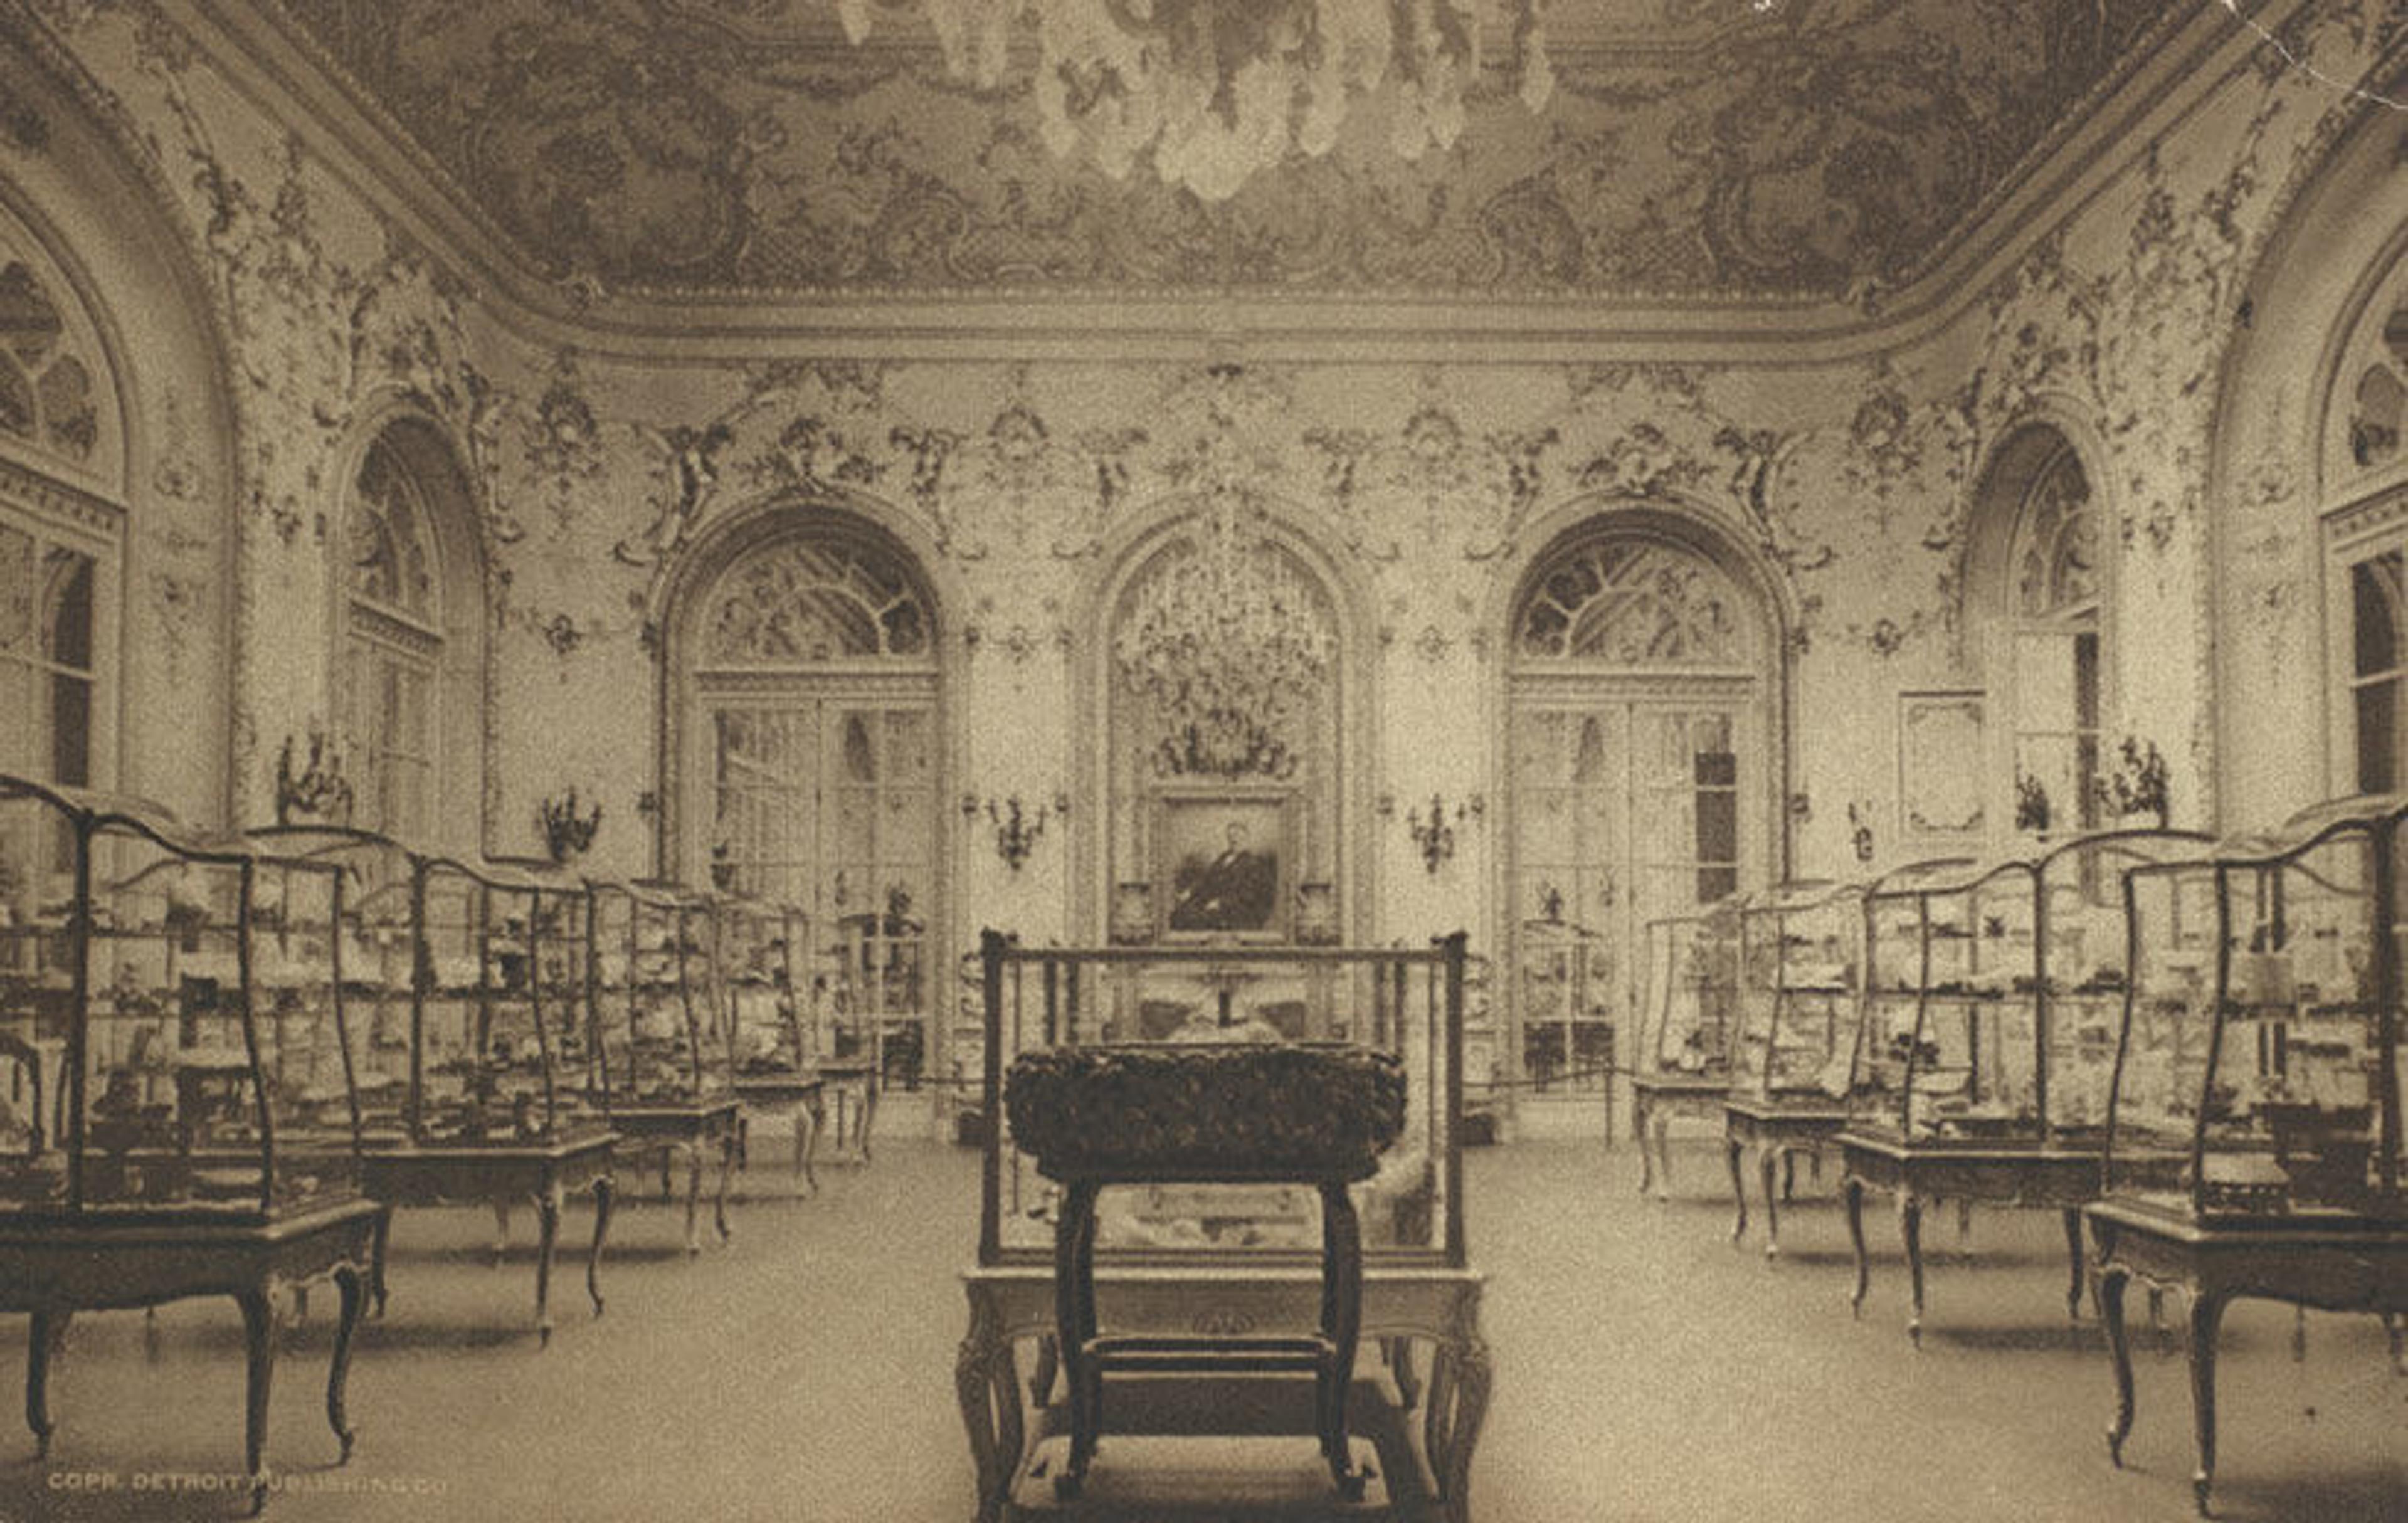 The Metropolitan Museum of Art, the Jade Room (Wing D, Room 4); View of the Bishop jade collection, as installed in the gallery. Photographed ca. 1907. © The Metropolitan Museum of Art